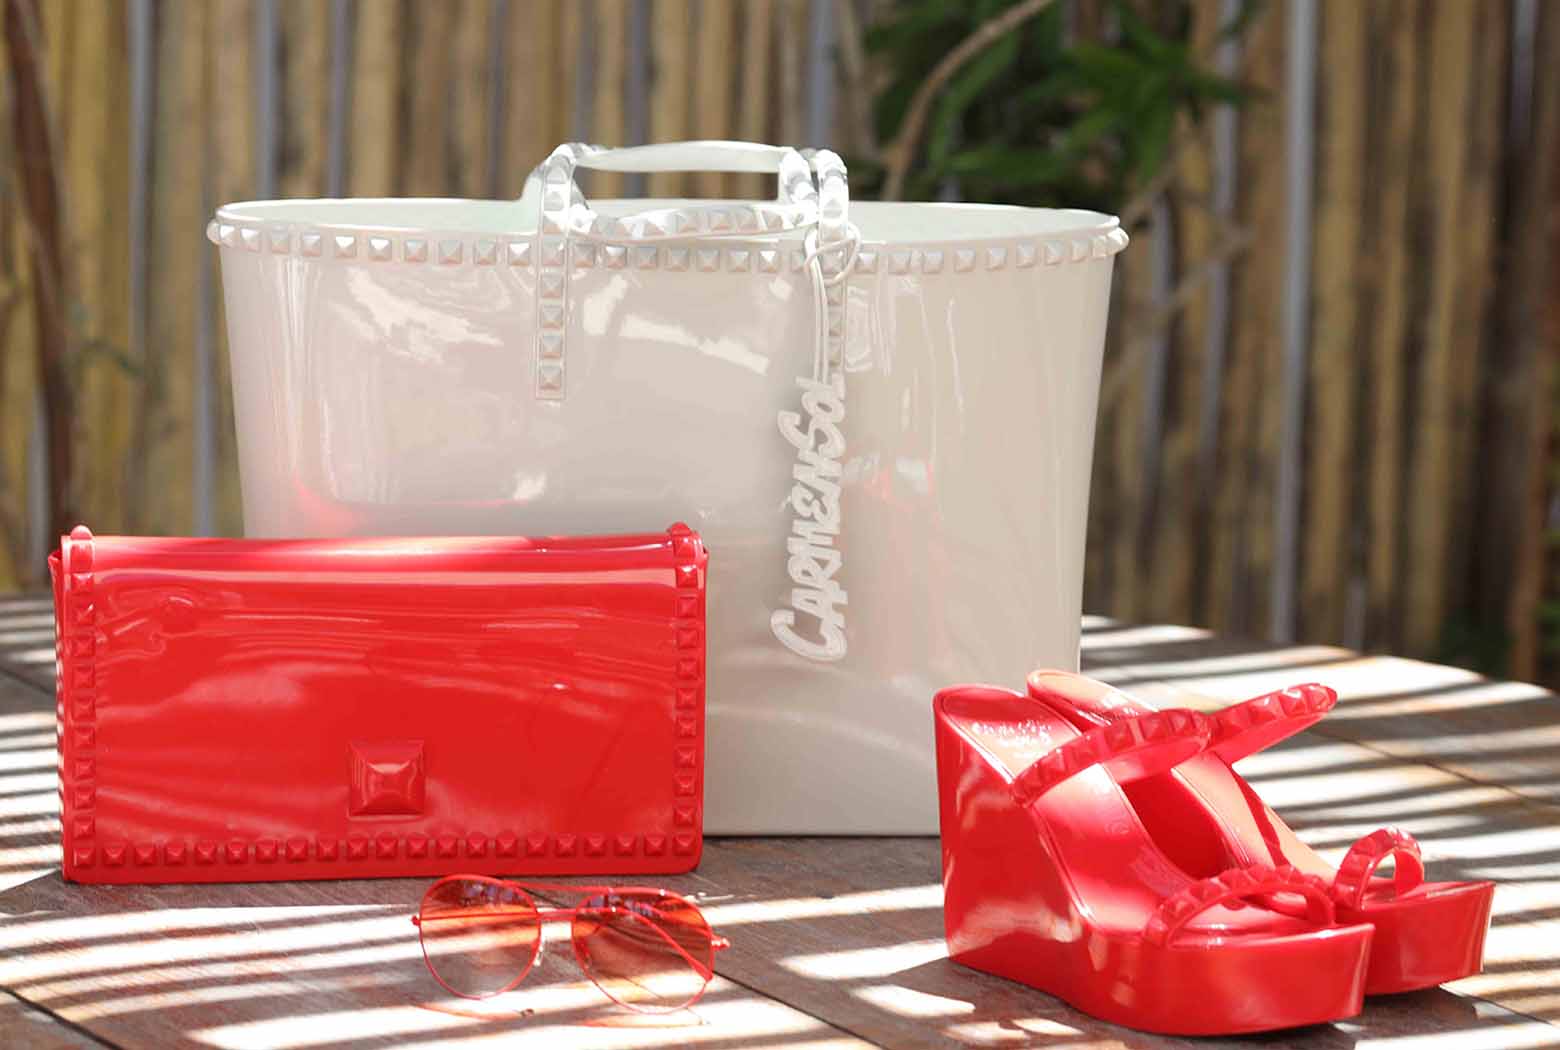 Carmensol Jelly Accessories, Jelly Bags, Jelly Purses, Jelly Tote, Jelly Shoes, Jelly Sandals